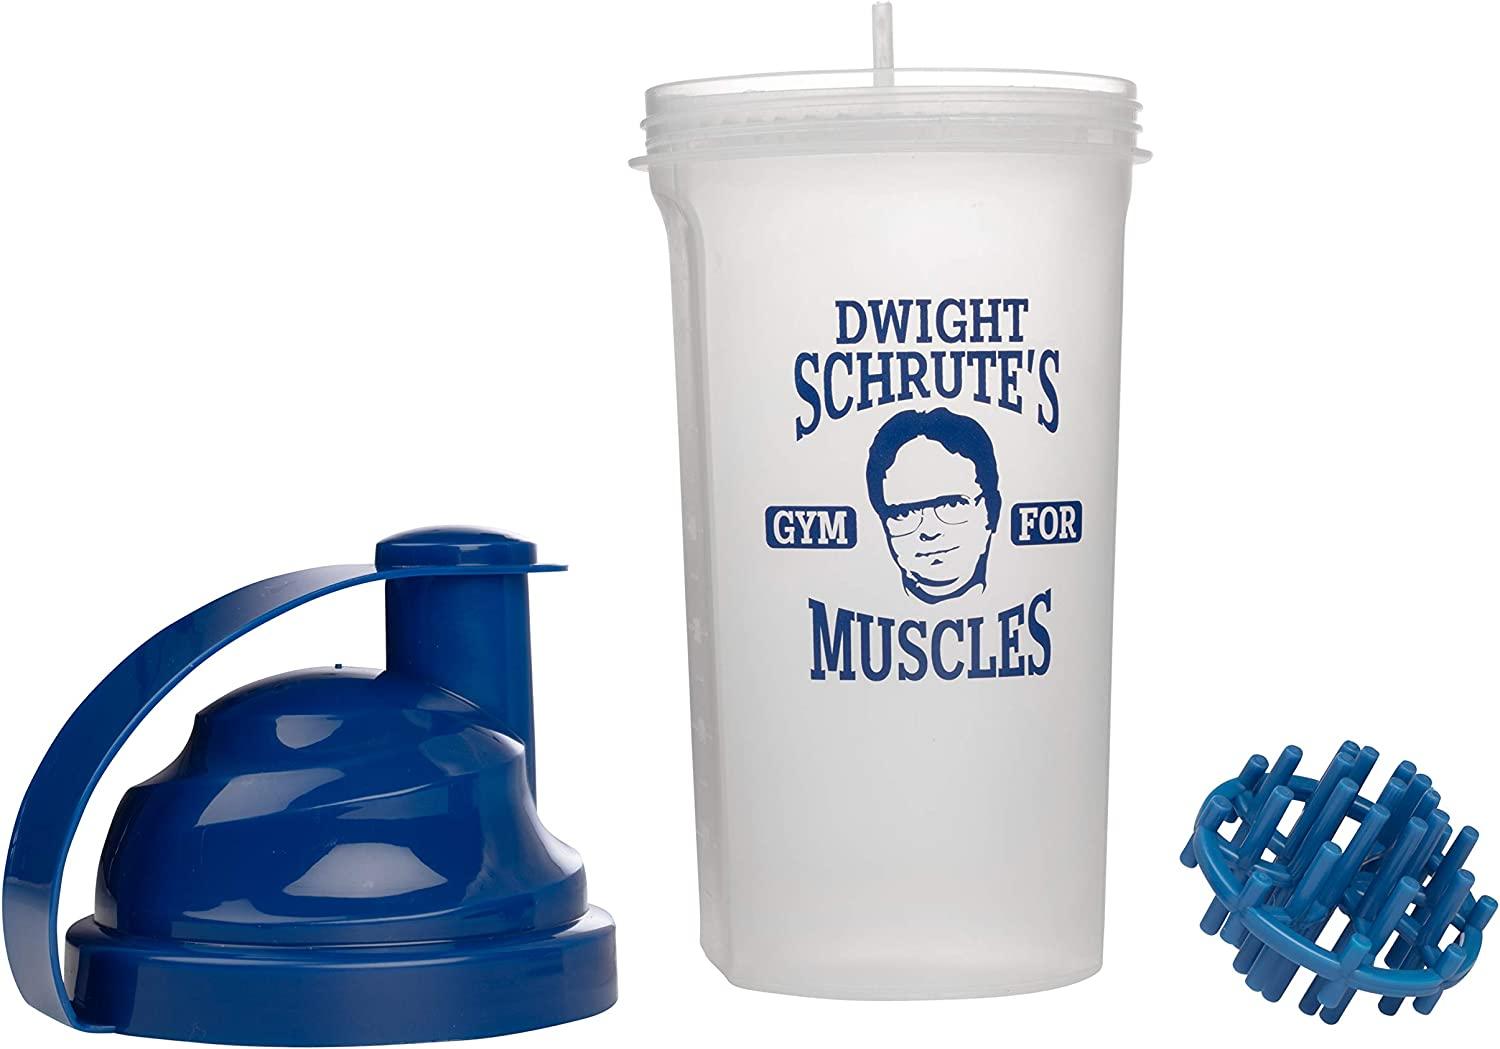 The Office Powder Shaker Bottle, 25oz - Dwight Schrute's Gym for